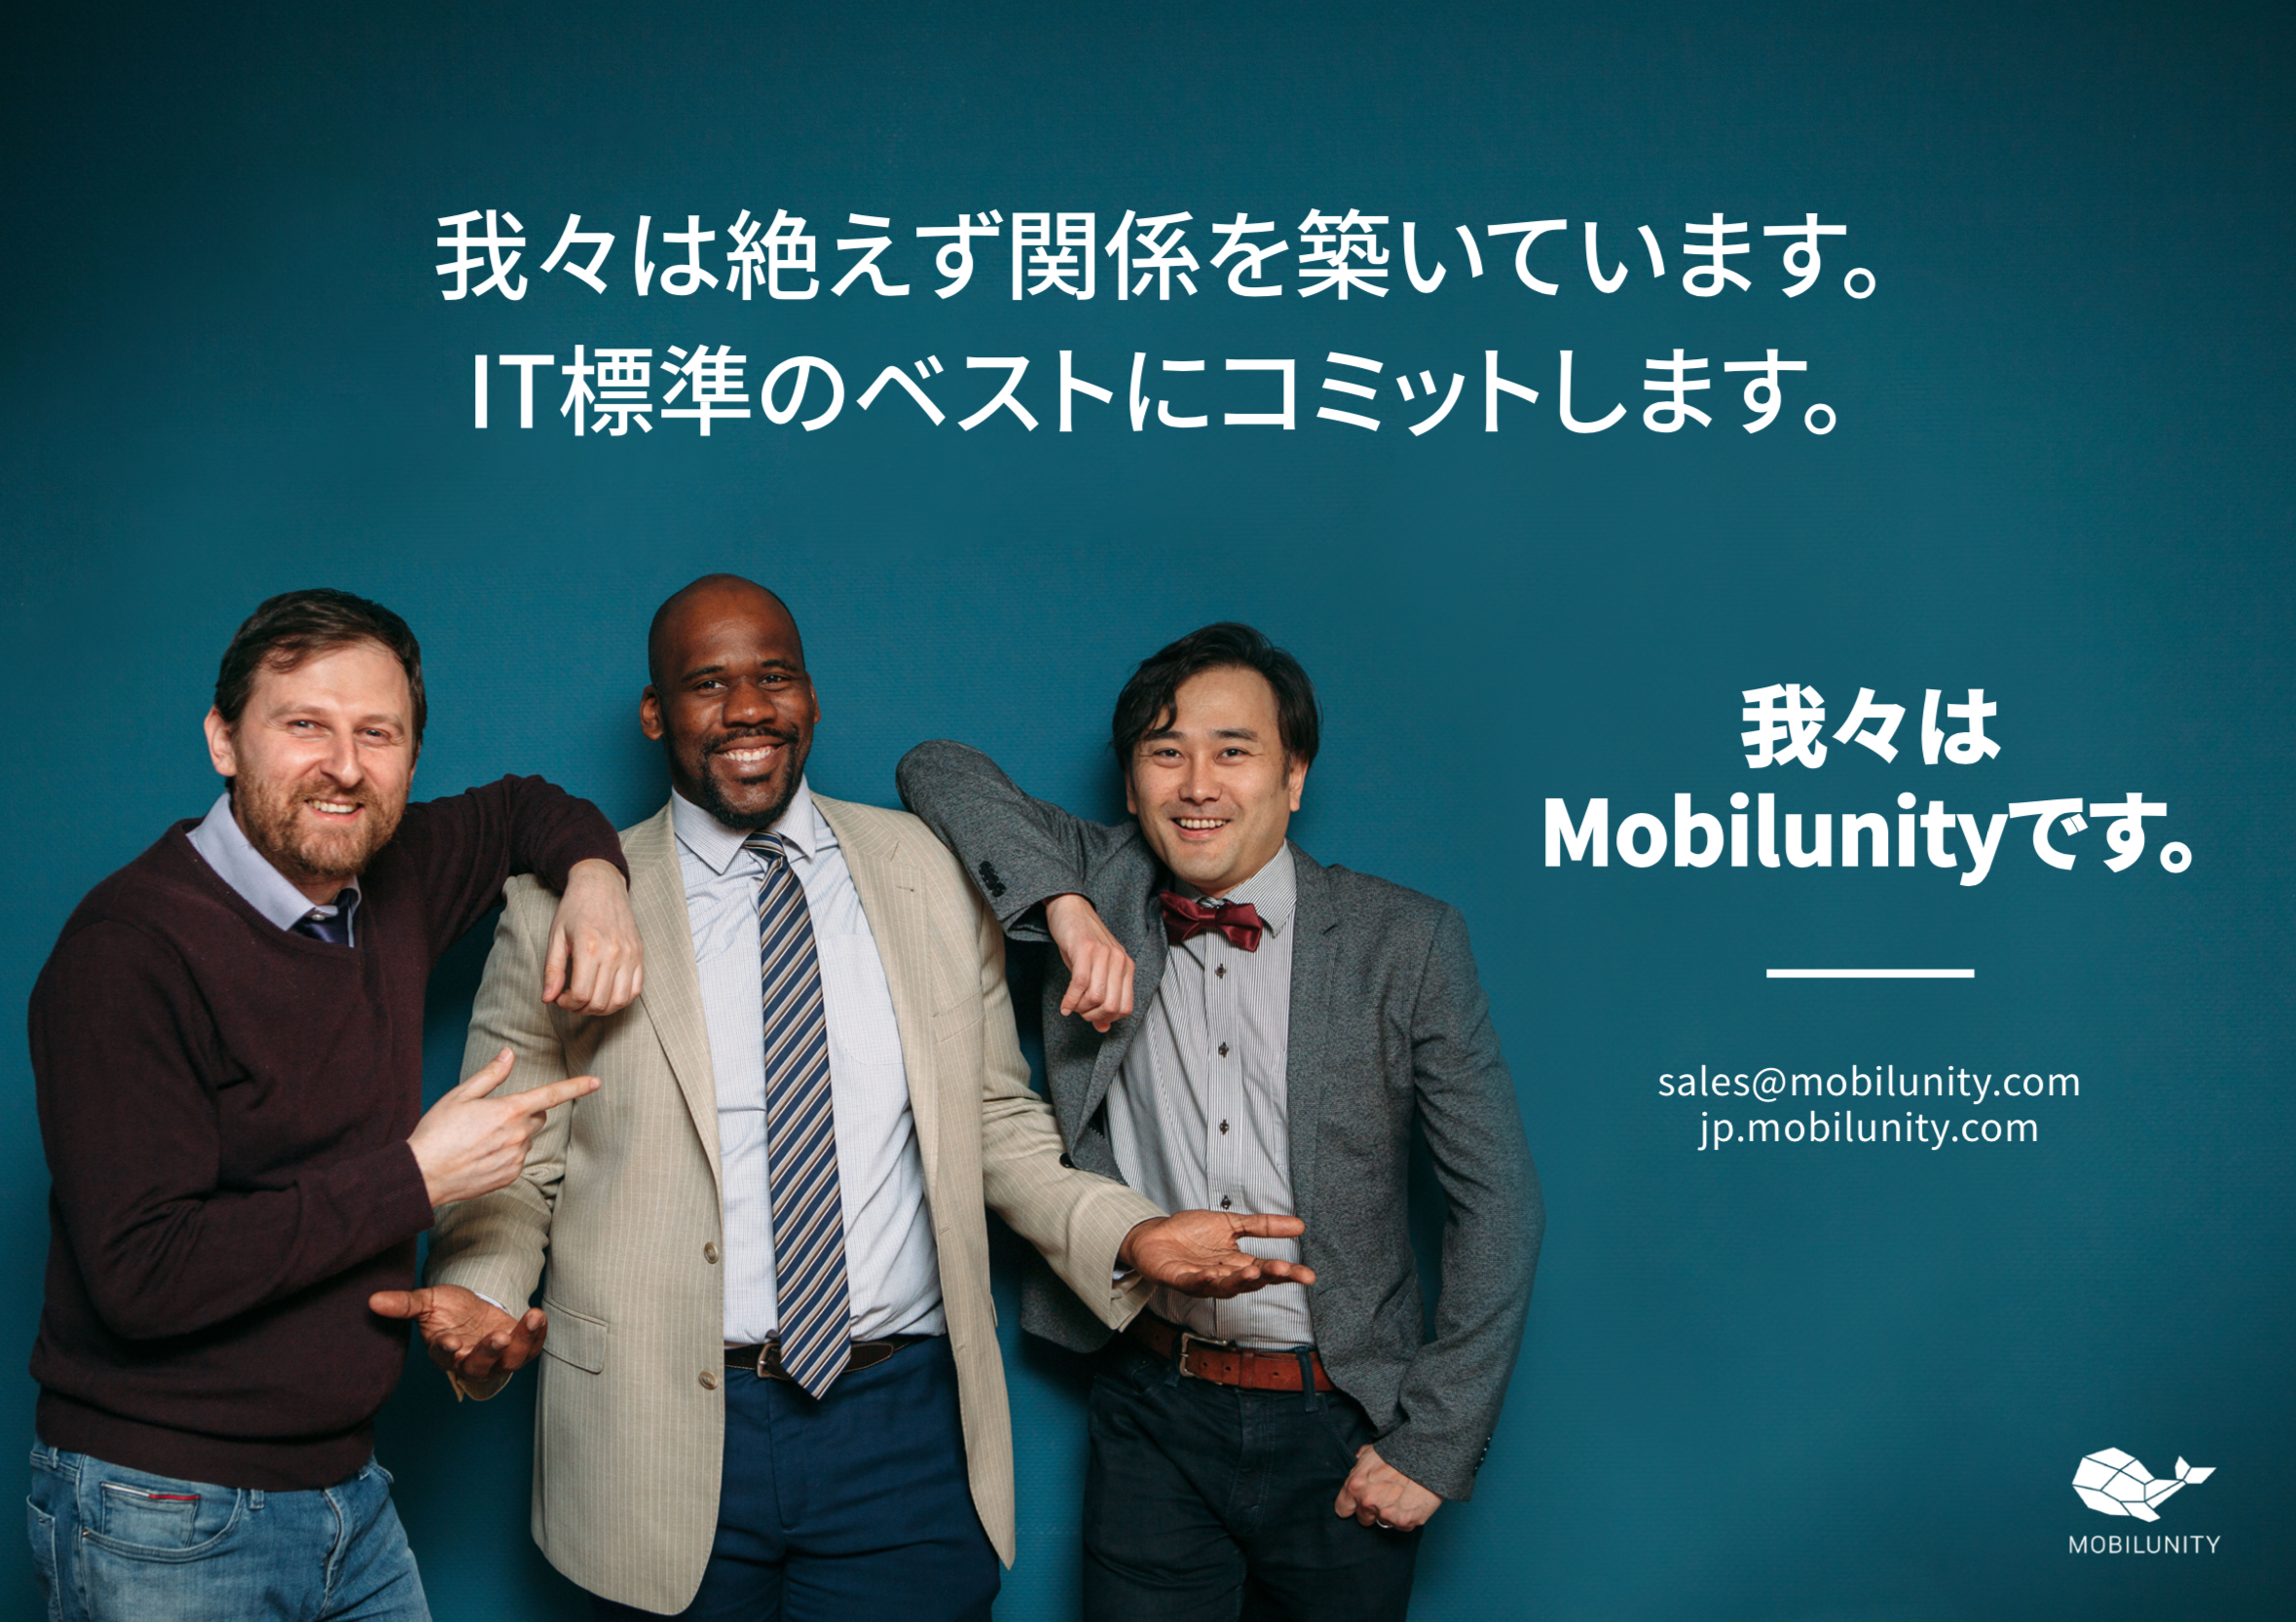 Mobilunity in Japan